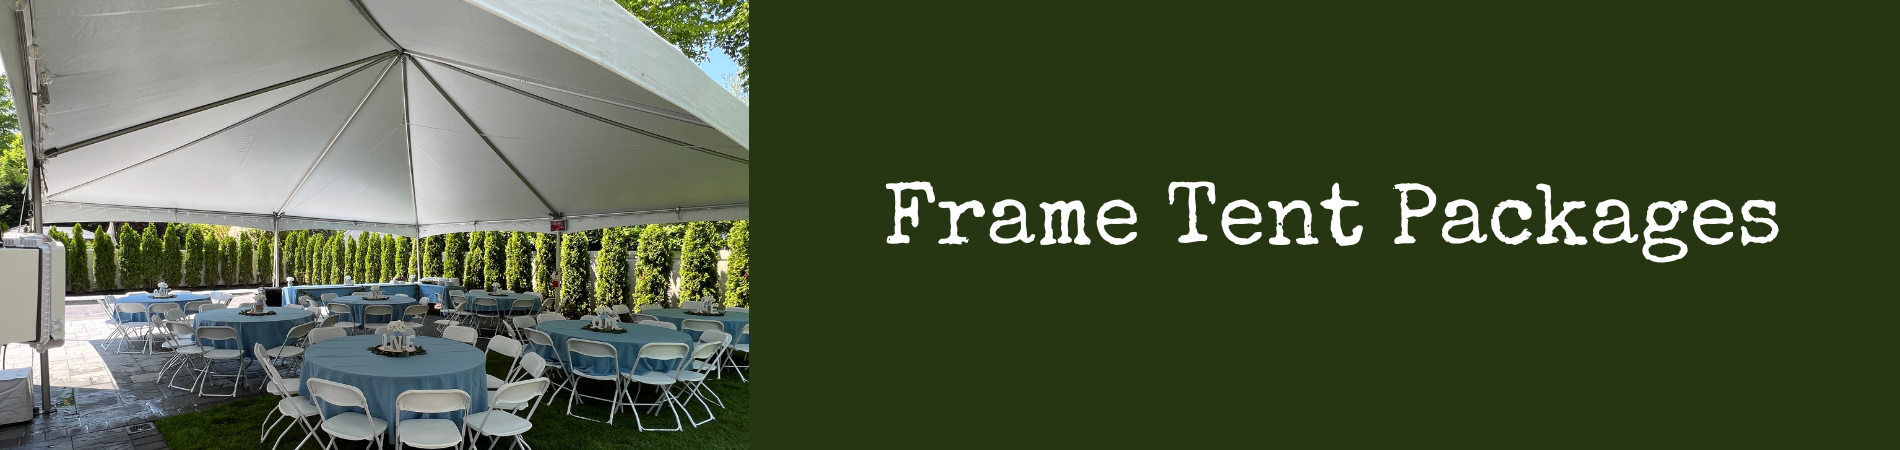 Frame Tent Party Packages